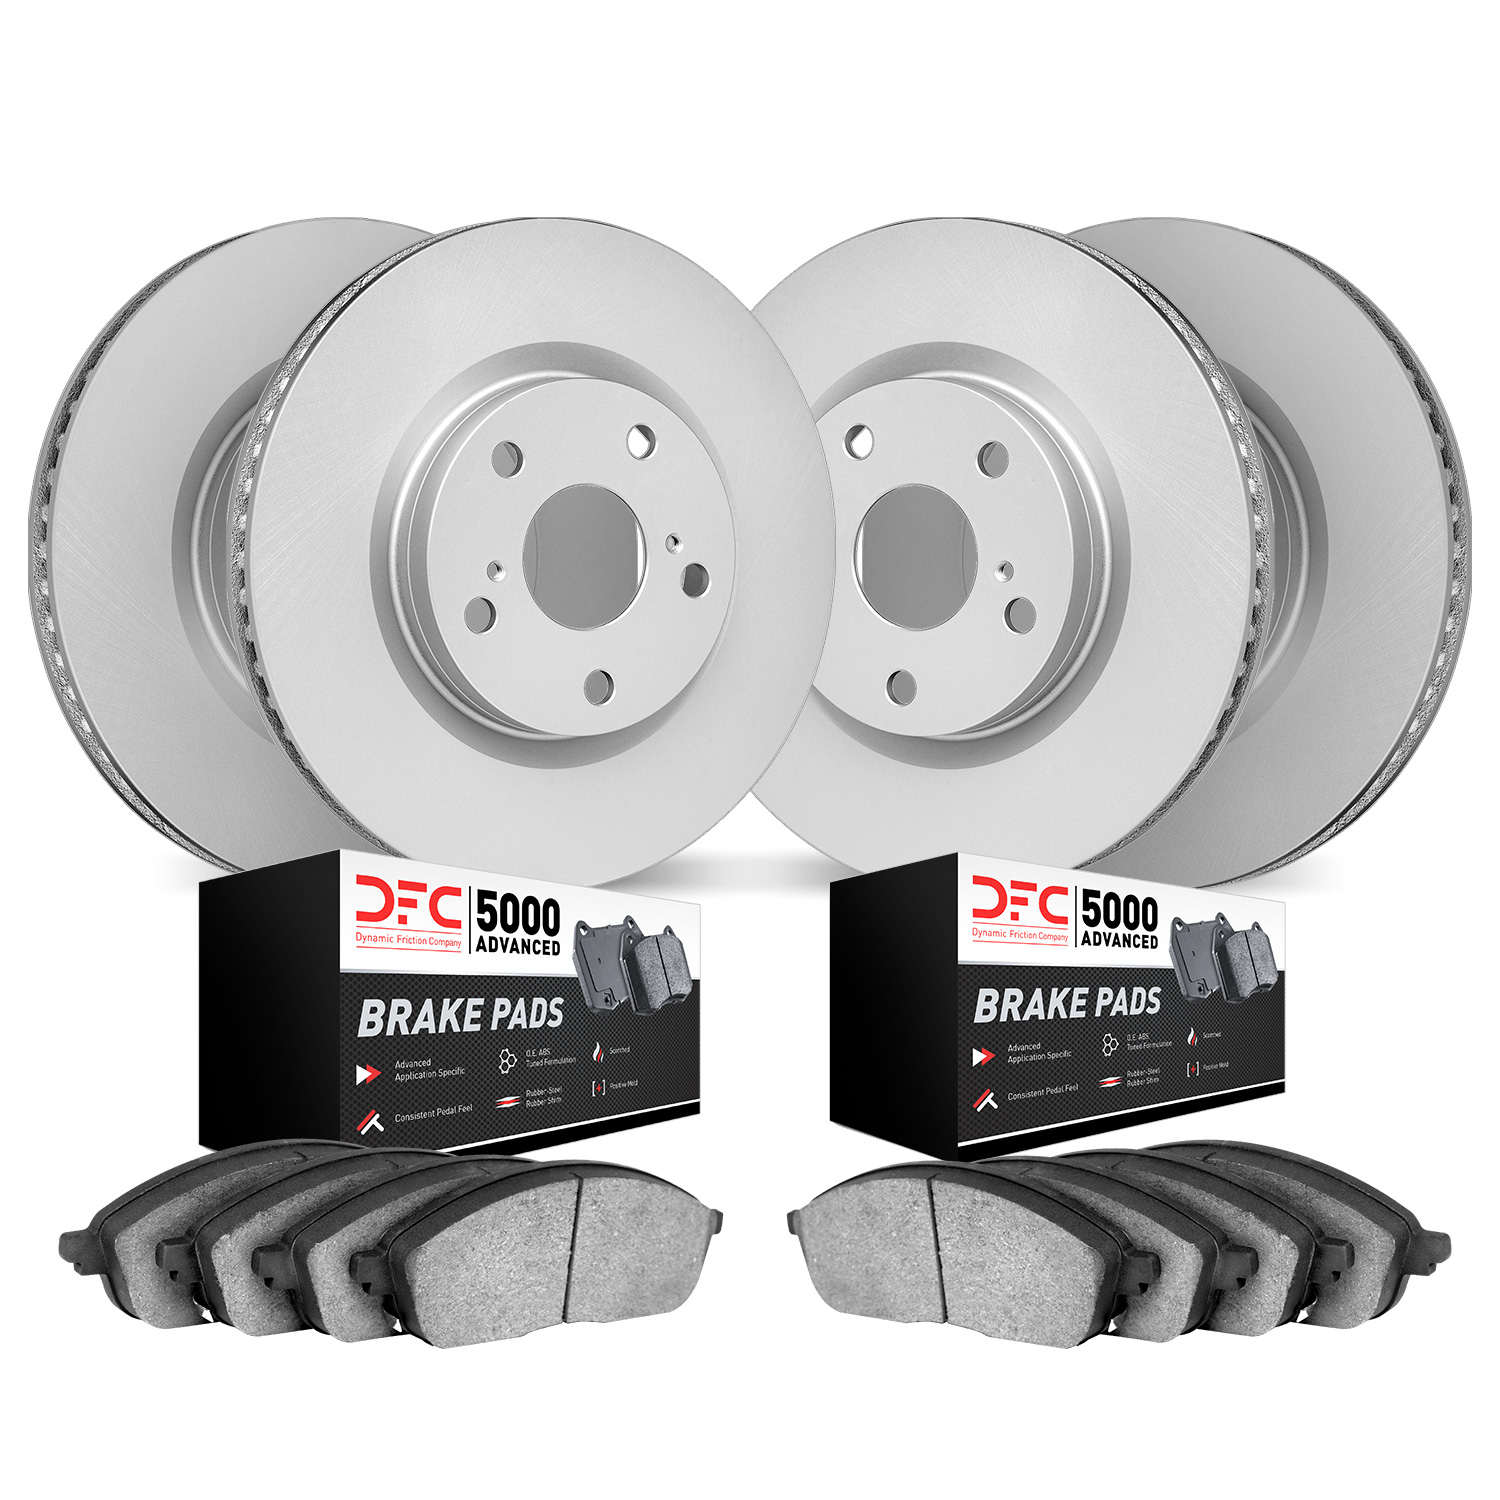 4504-11010 Geospec Brake Rotors w/5000 Advanced Brake Pads Kit, 2010-2013 Land Rover, Position: Front and Rear